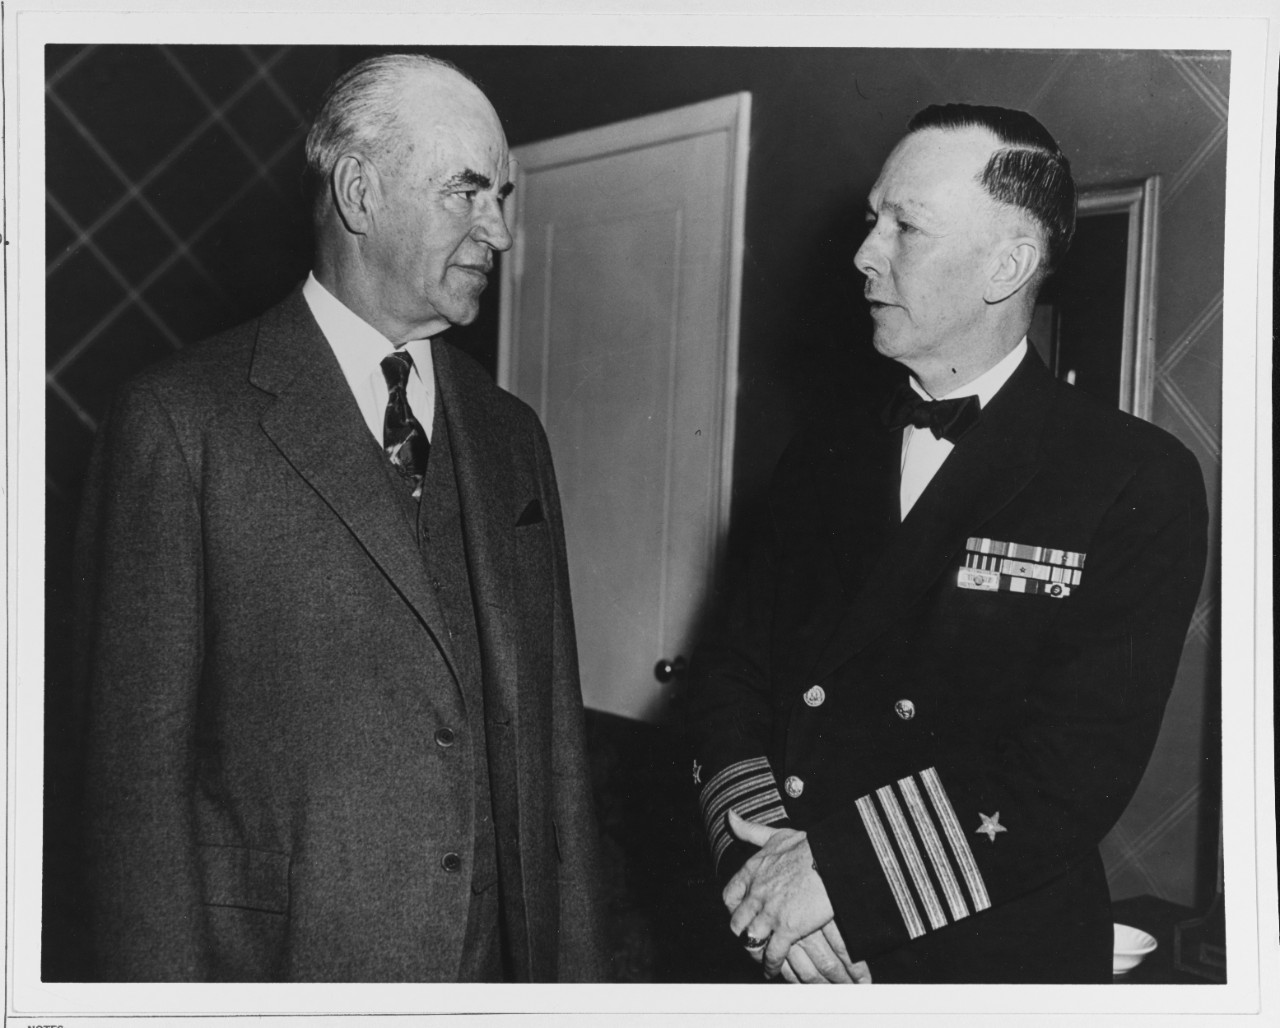 Captain Damon E. Cummings USN and President Hopkins of Dartmouth College about 1947